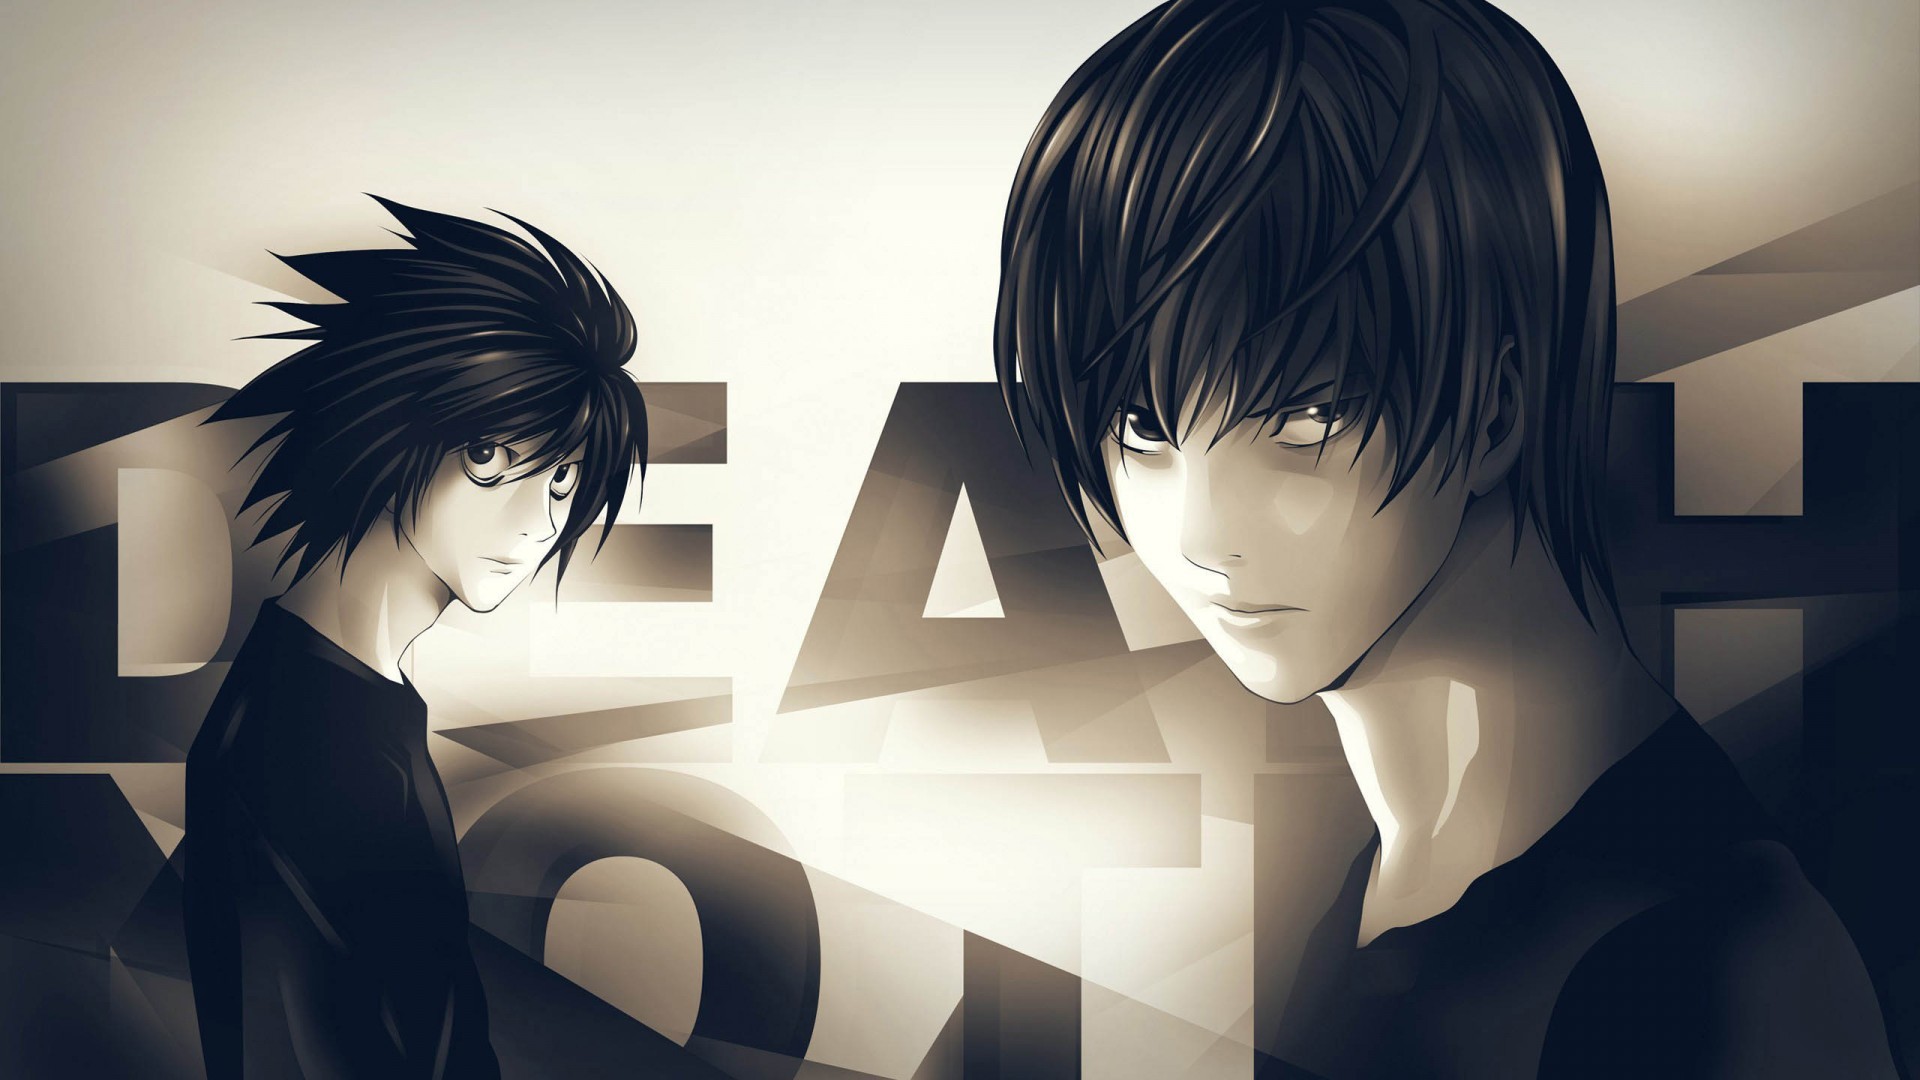 Anime, Death Note, Lawliet L, Light Yagami Wallpaper